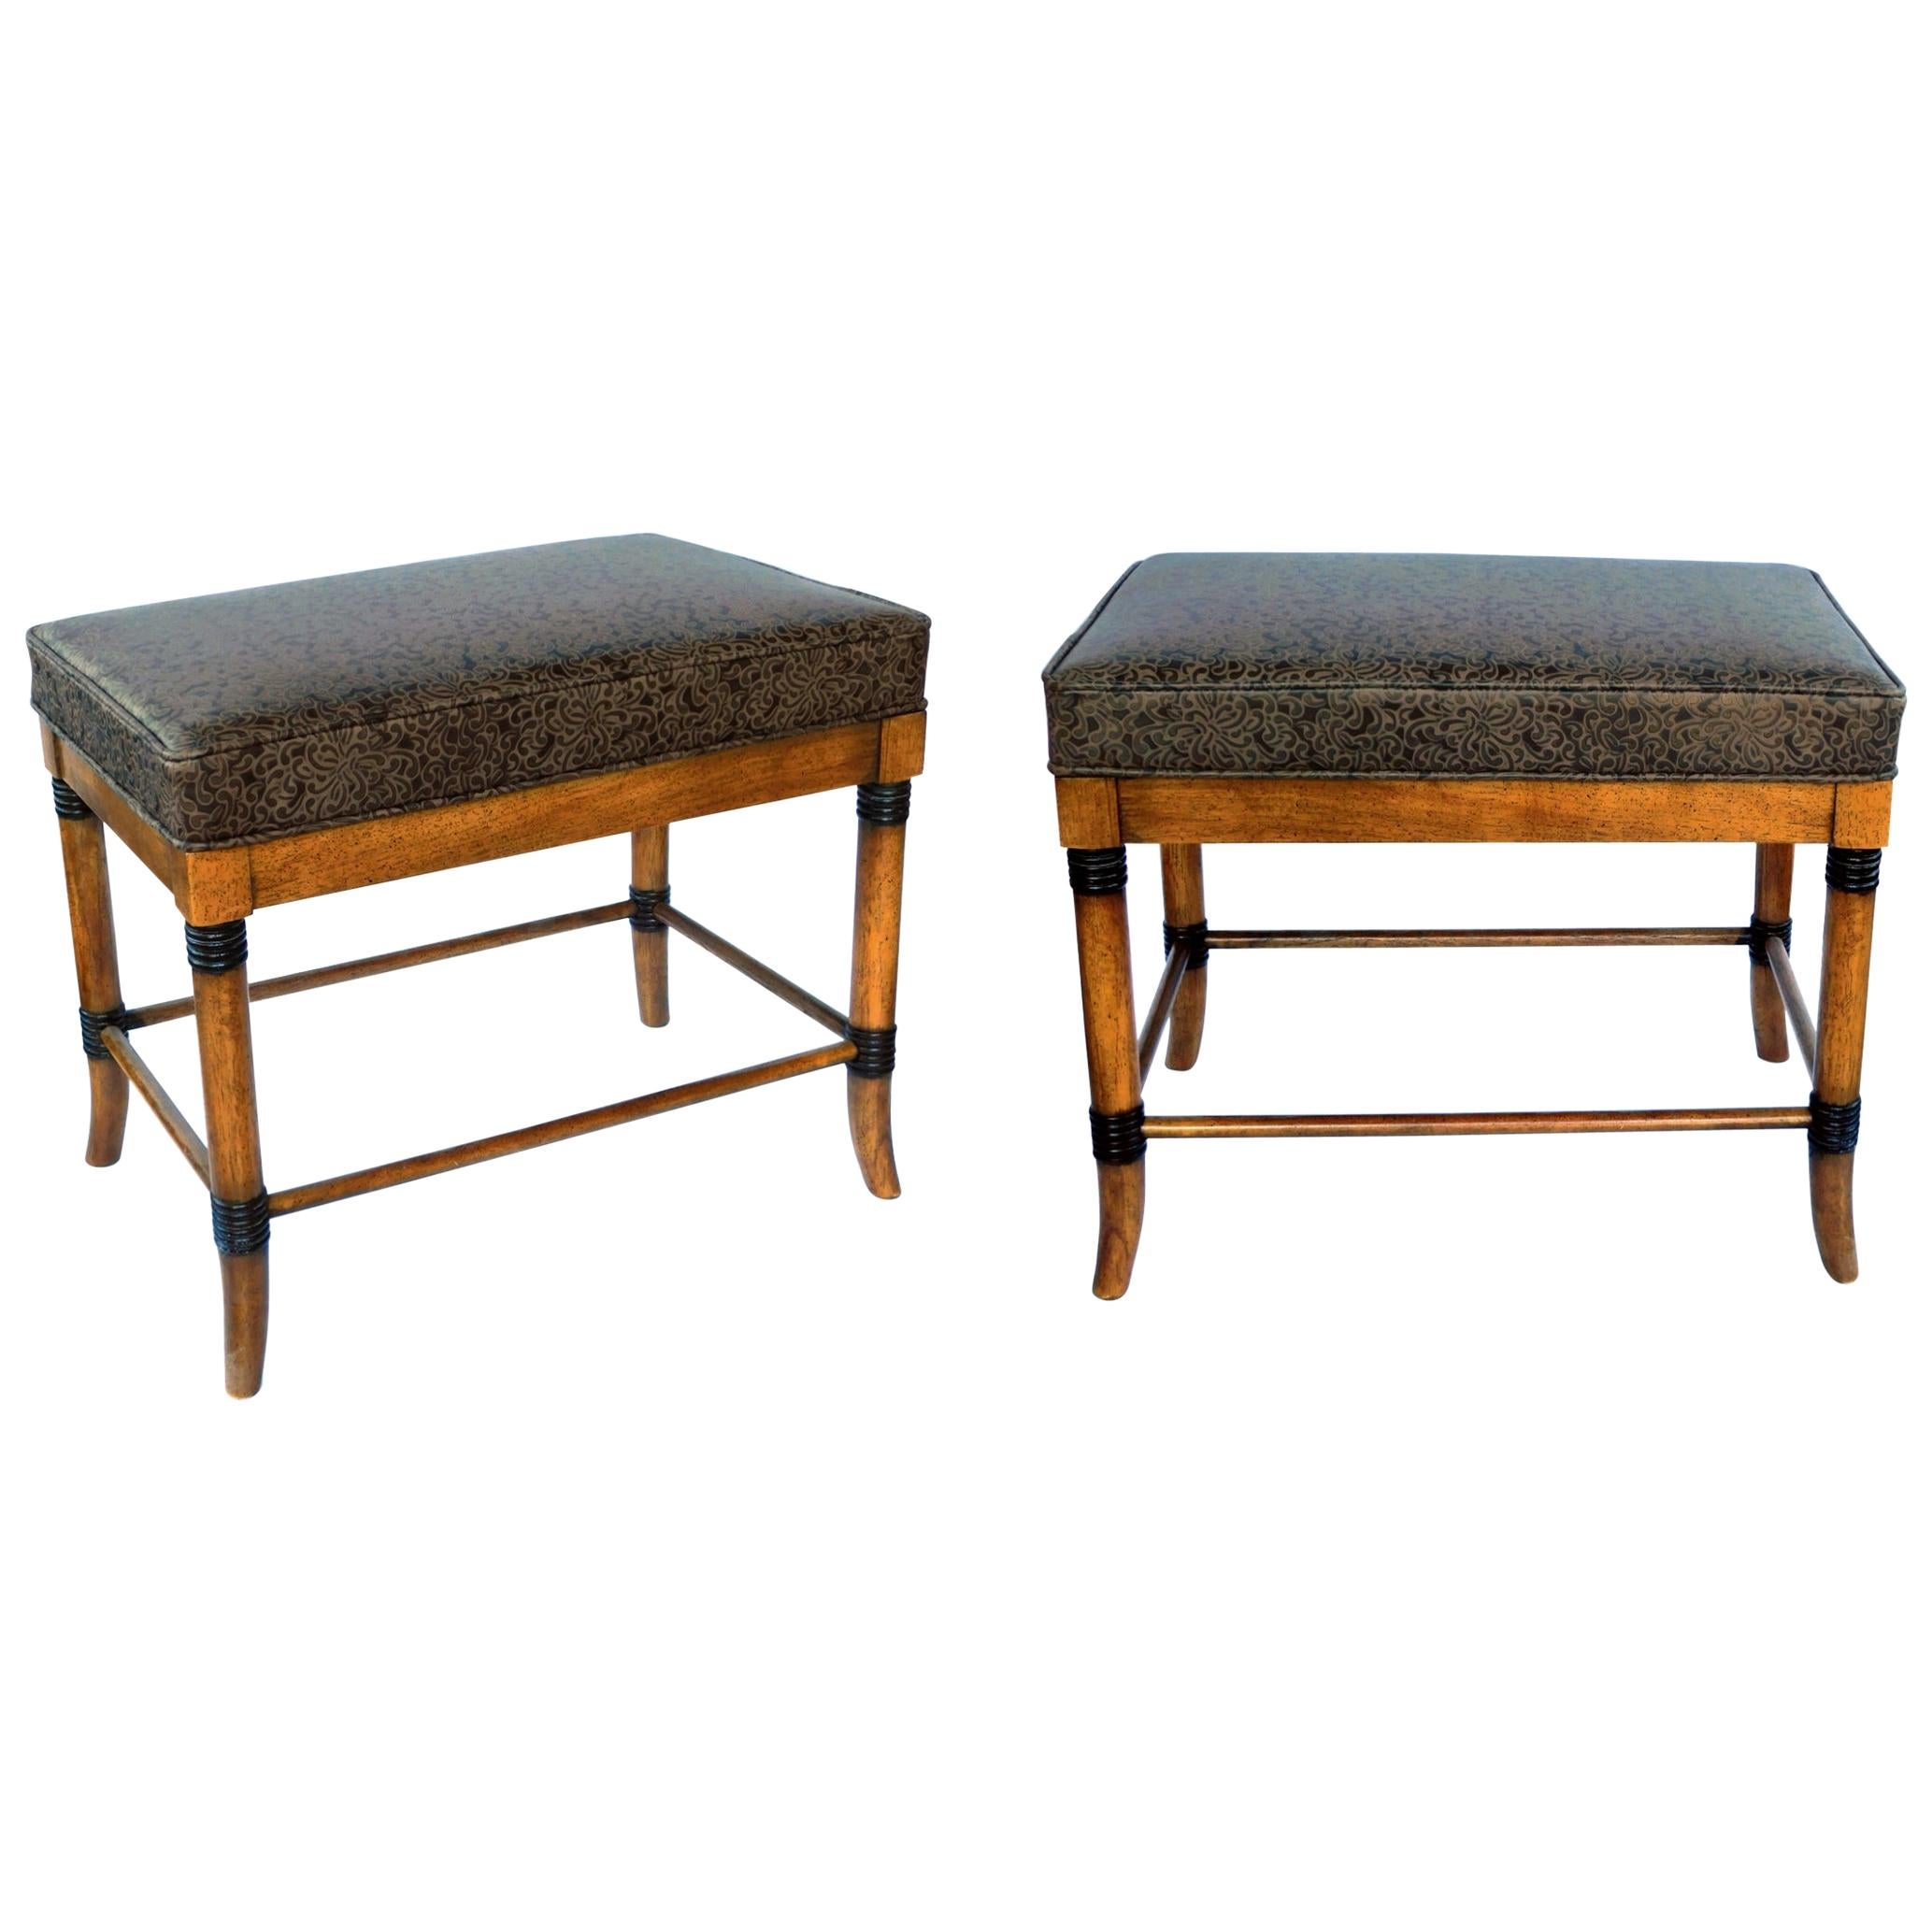 Pair of American 1960s Ash Faux Bamboo Rectangular Stools/Benches